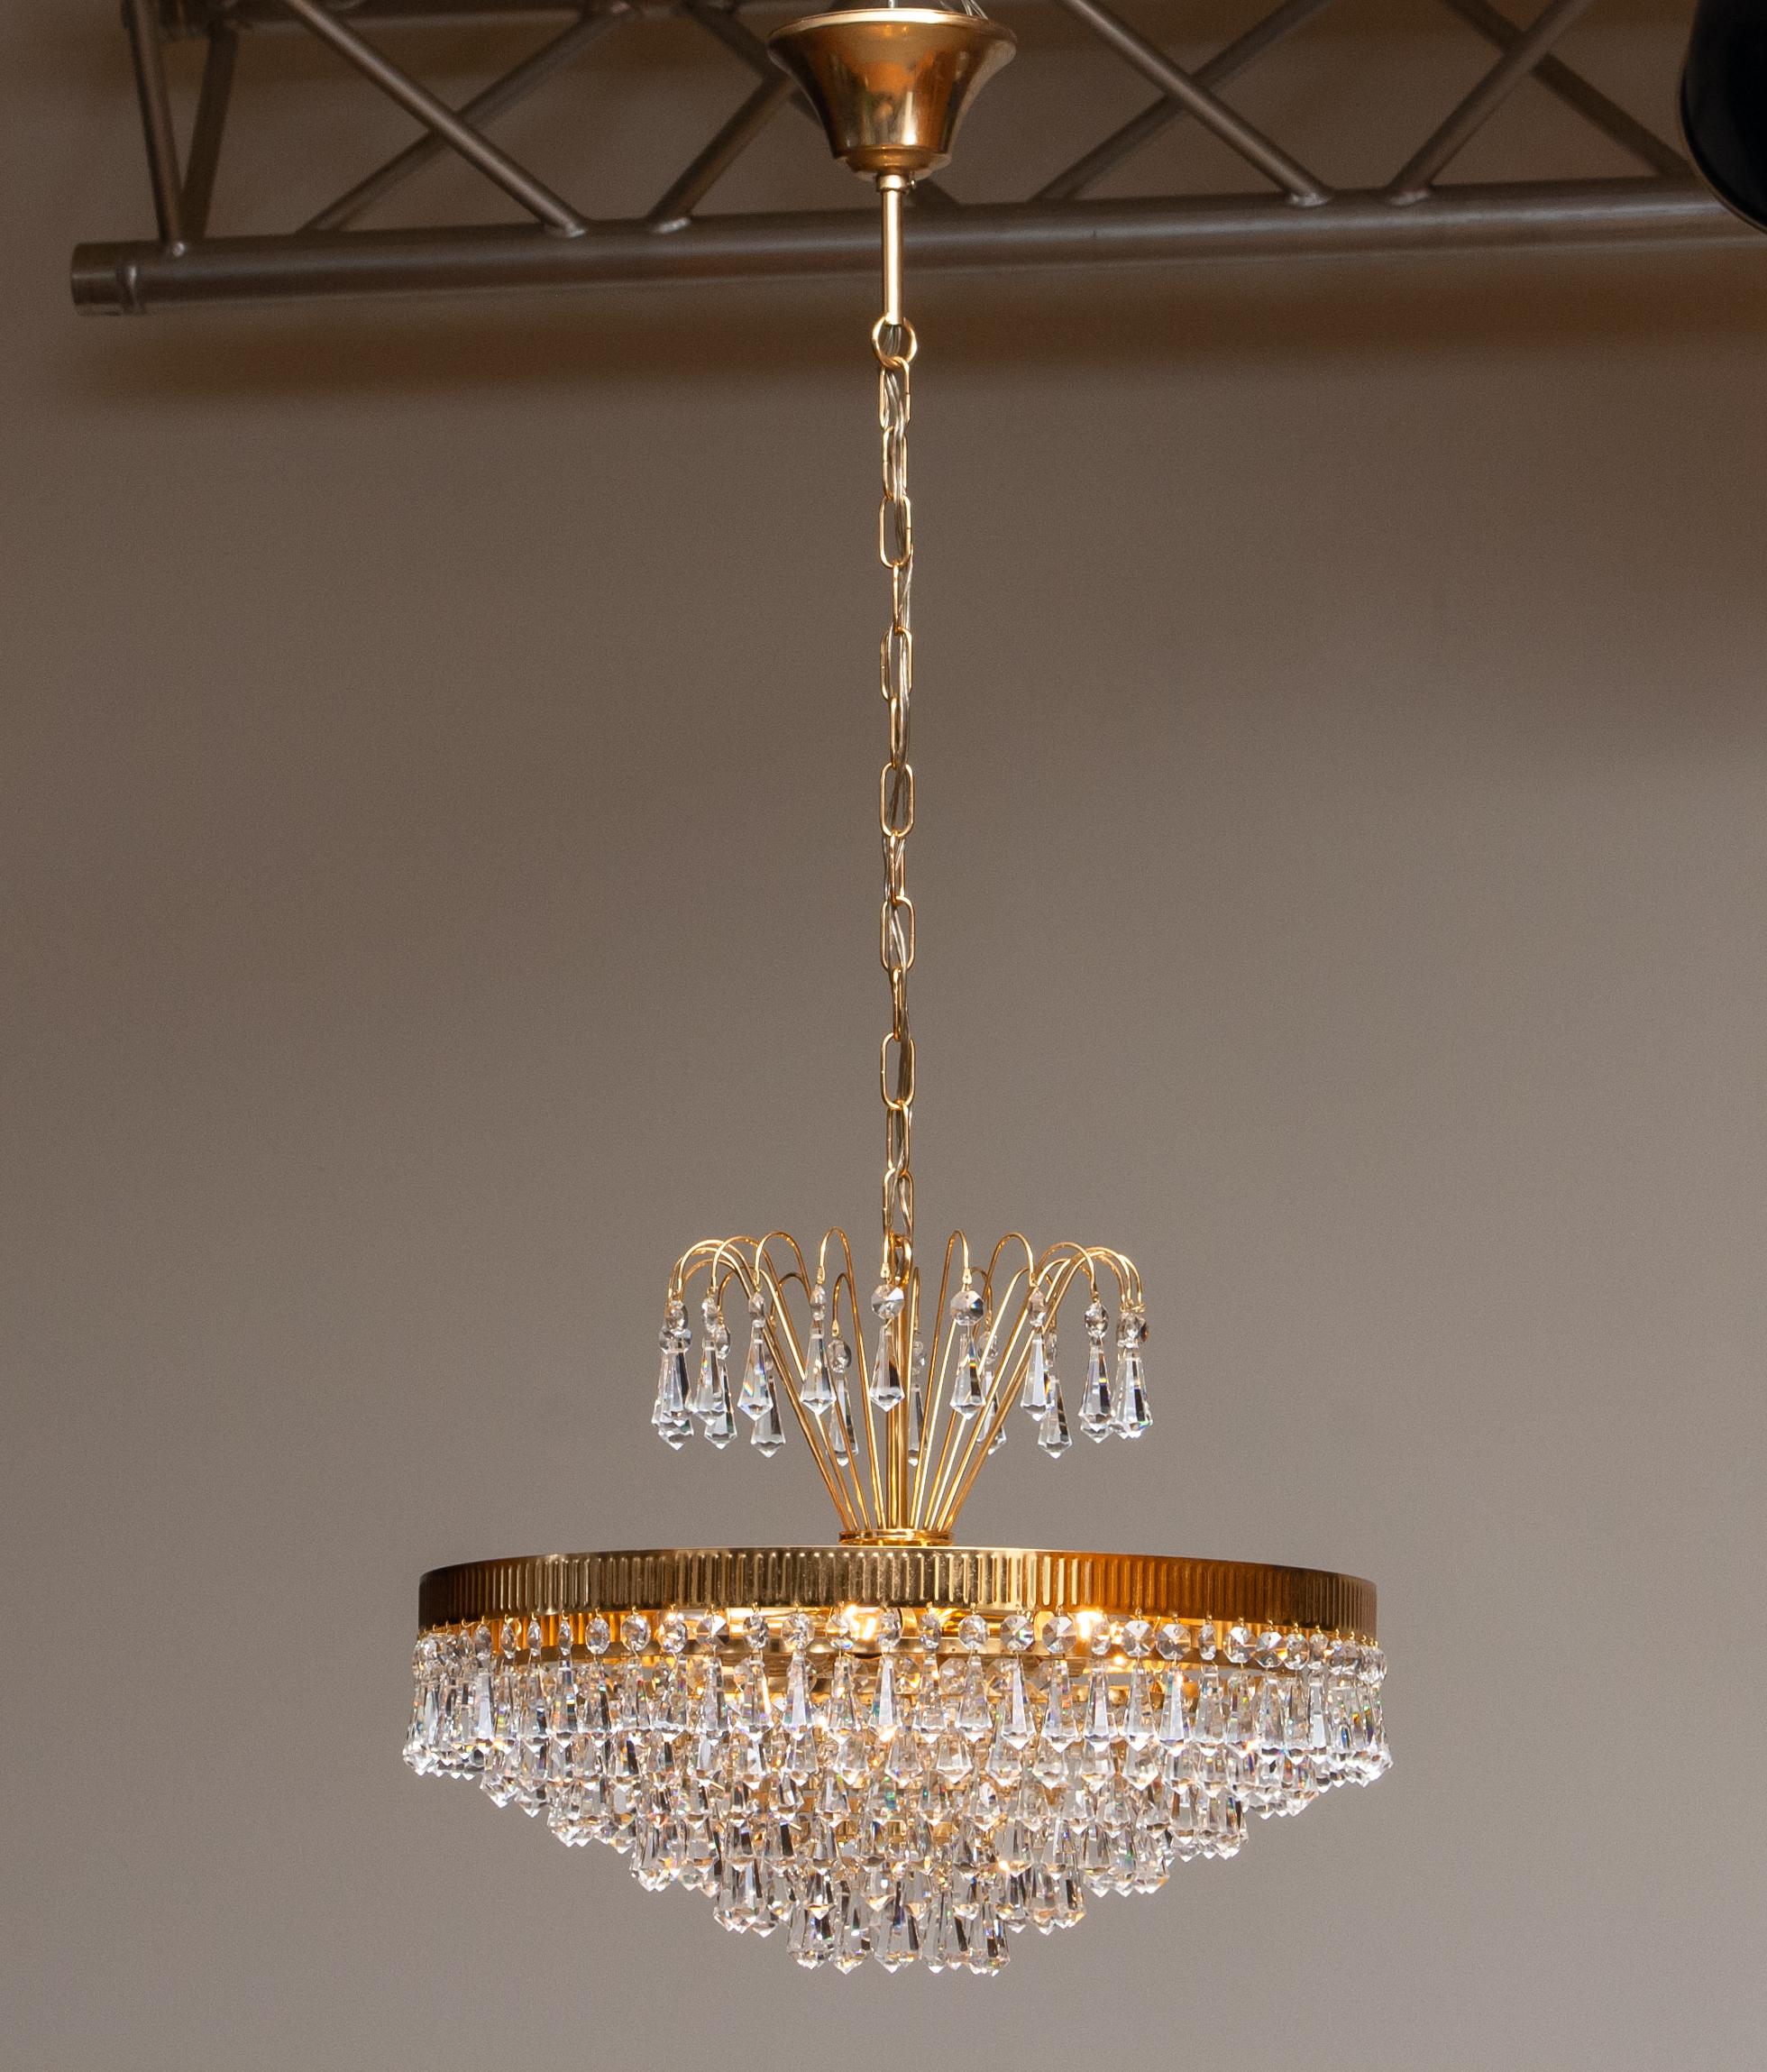 Extremely beautiful and rare 24-carat gold-plated chandelier made by Rejmyre Armaturfabrik Rejmyre, Sweden, 1960s.
The chandelier is build up out of six rings and a crown filled with faceted crystal chains, total diameter of the fixture is 40cm or